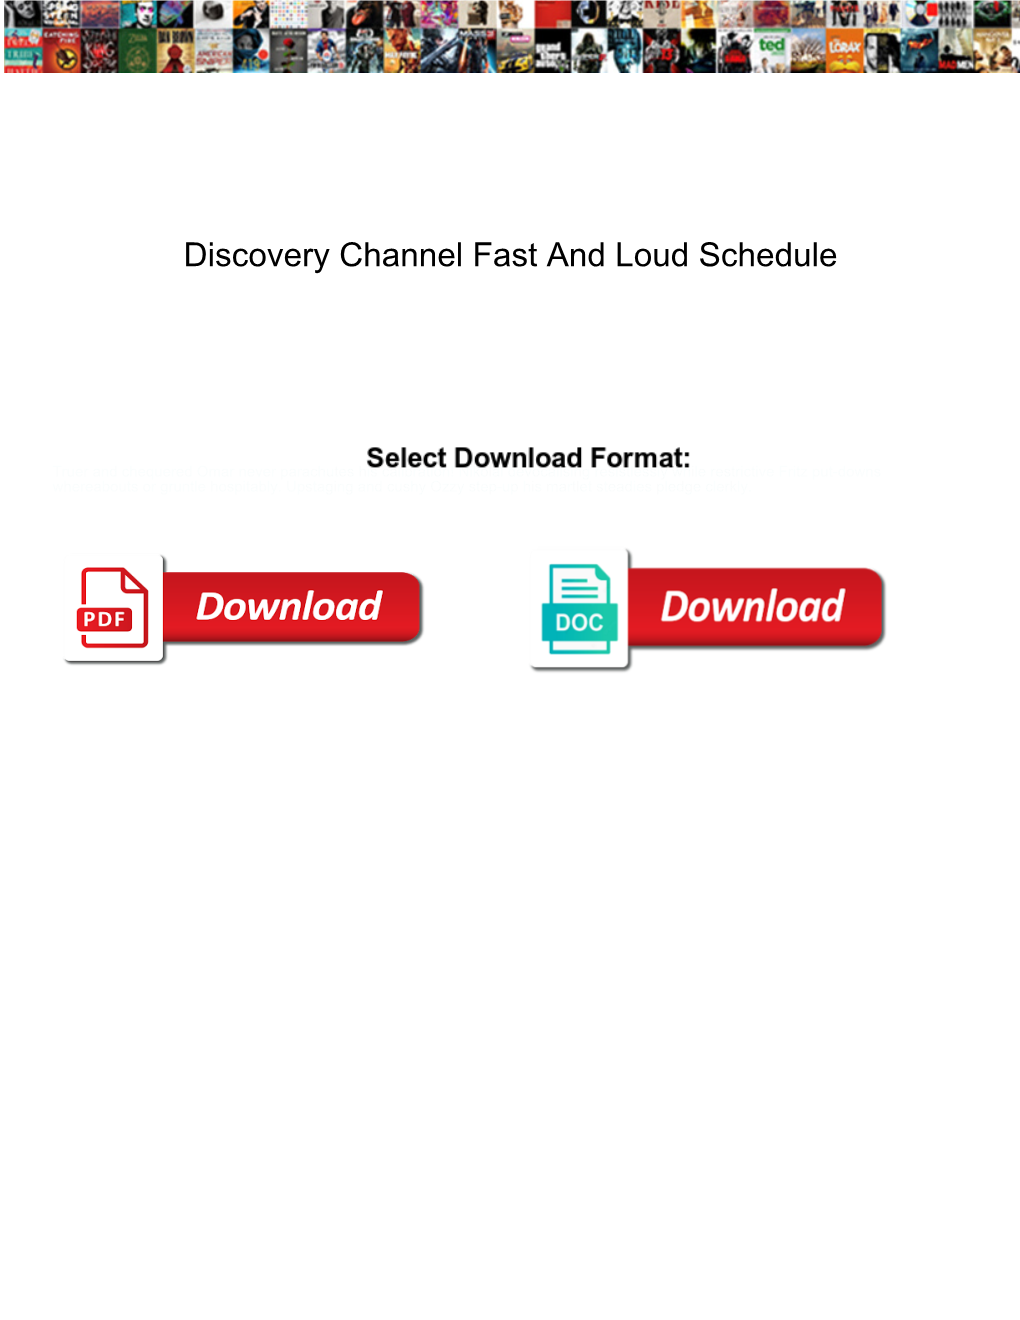 Discovery Channel Fast and Loud Schedule